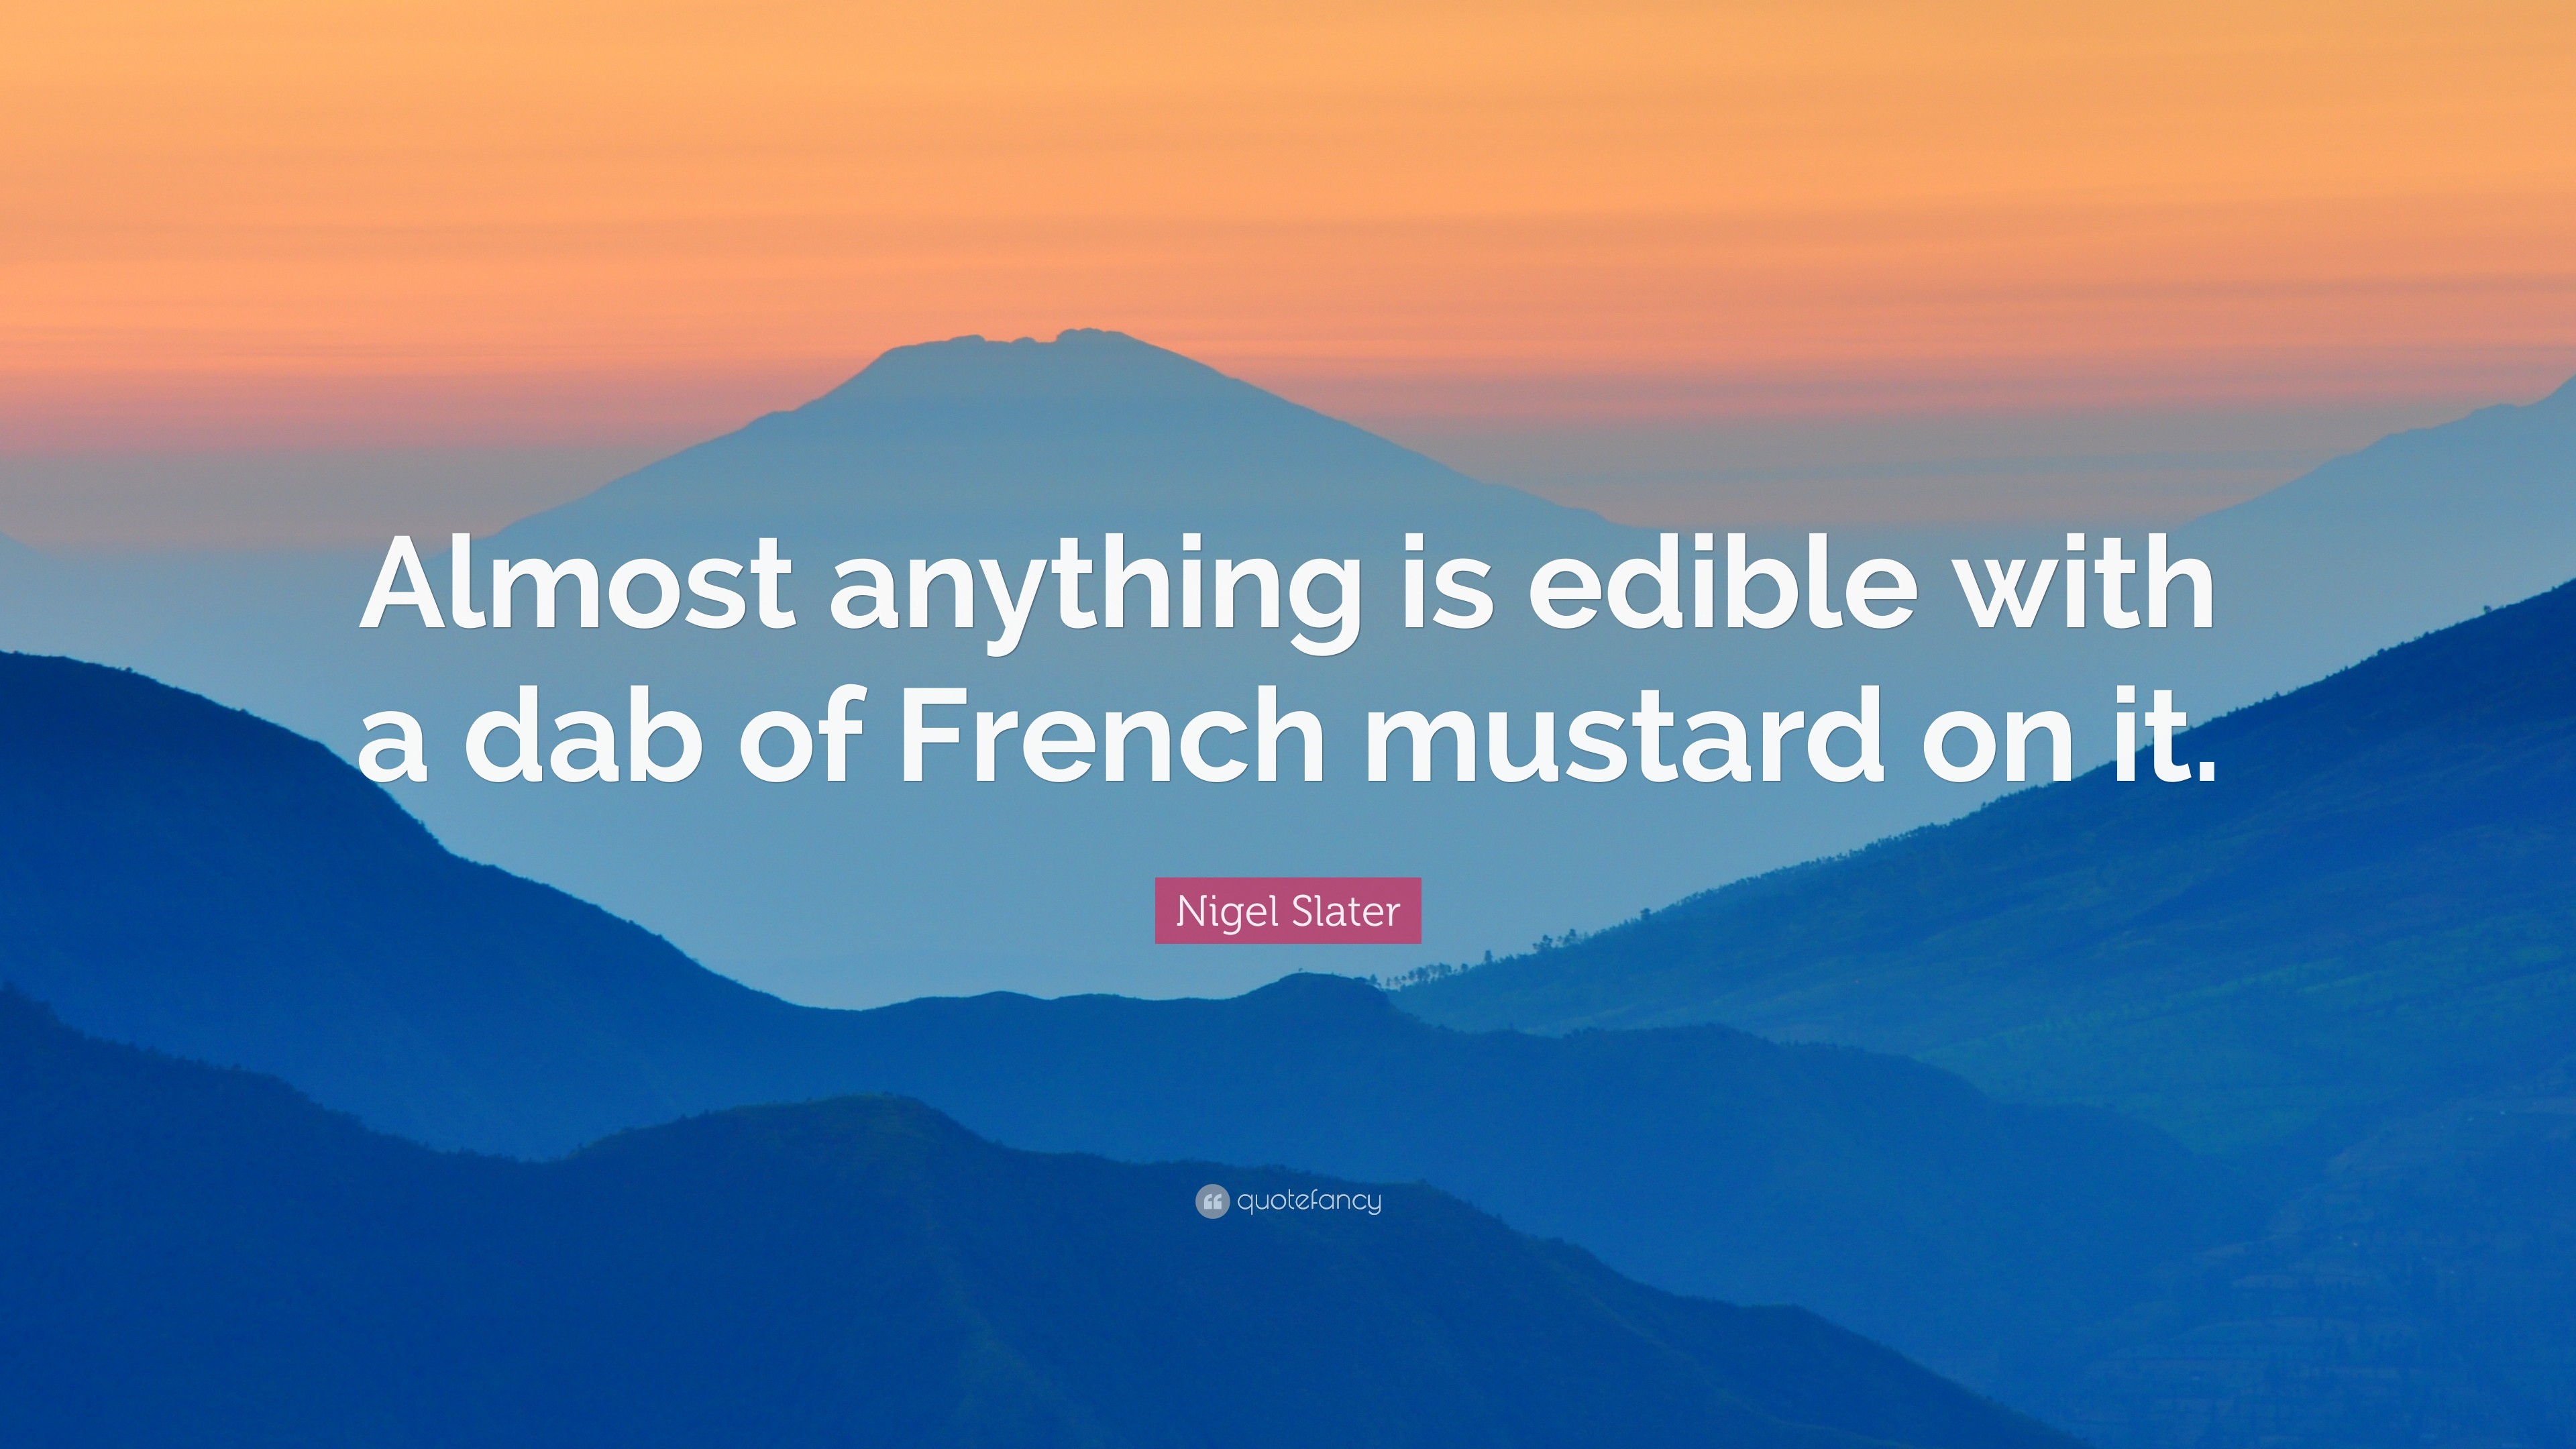 3840x2160 Nigel Slater Quote: “Almost anything is edible with a dab of French mustard  on